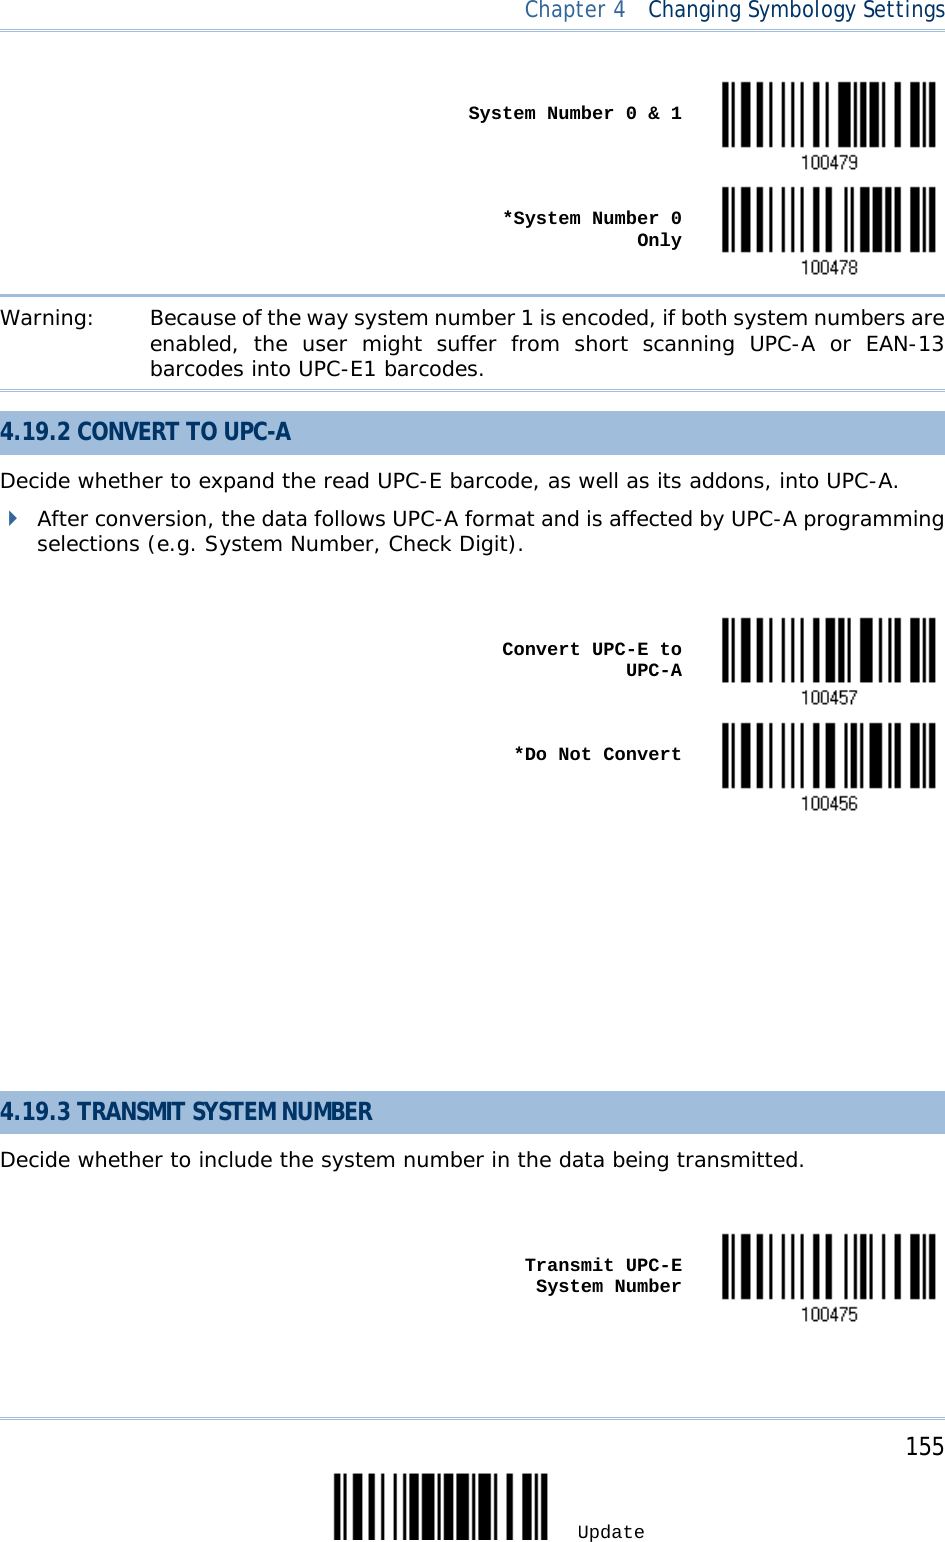  Chapter 4  Changing Symbology Settings     System Number 0 &amp; 1     *System Number 0 Only  Warning: Because of the way system number 1 is encoded, if both system numbers are enabled, the user might suffer from short scanning UPC-A or EAN-13 barcodes into UPC-E1 barcodes. 4.19.2 CONVERT TO UPC-A Decide whether to expand the read UPC-E barcode, as well as its addons, into UPC-A.   After conversion, the data follows UPC-A format and is affected by UPC-A programming selections (e.g. System Number, Check Digit).     Convert UPC-E to UPC-A     *Do Not Convert              4.19.3 TRANSMIT SYSTEM NUMBER Decide whether to include the system number in the data being transmitted.     Transmit UPC-E System Number      155 Update 